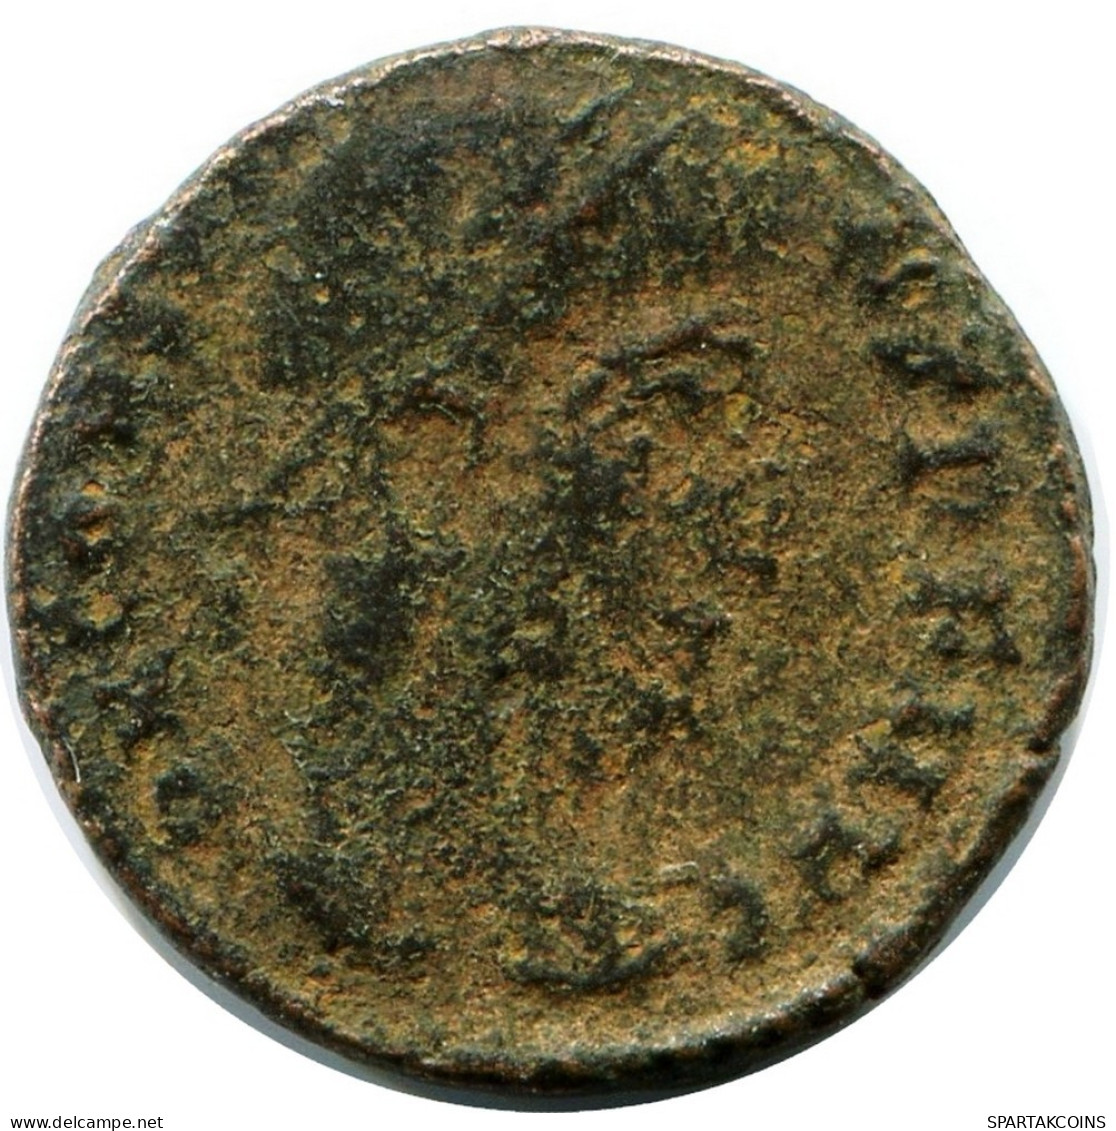 CONSTANS MINTED IN CYZICUS FROM THE ROYAL ONTARIO MUSEUM #ANC11684.14.E.A - The Christian Empire (307 AD Tot 363 AD)